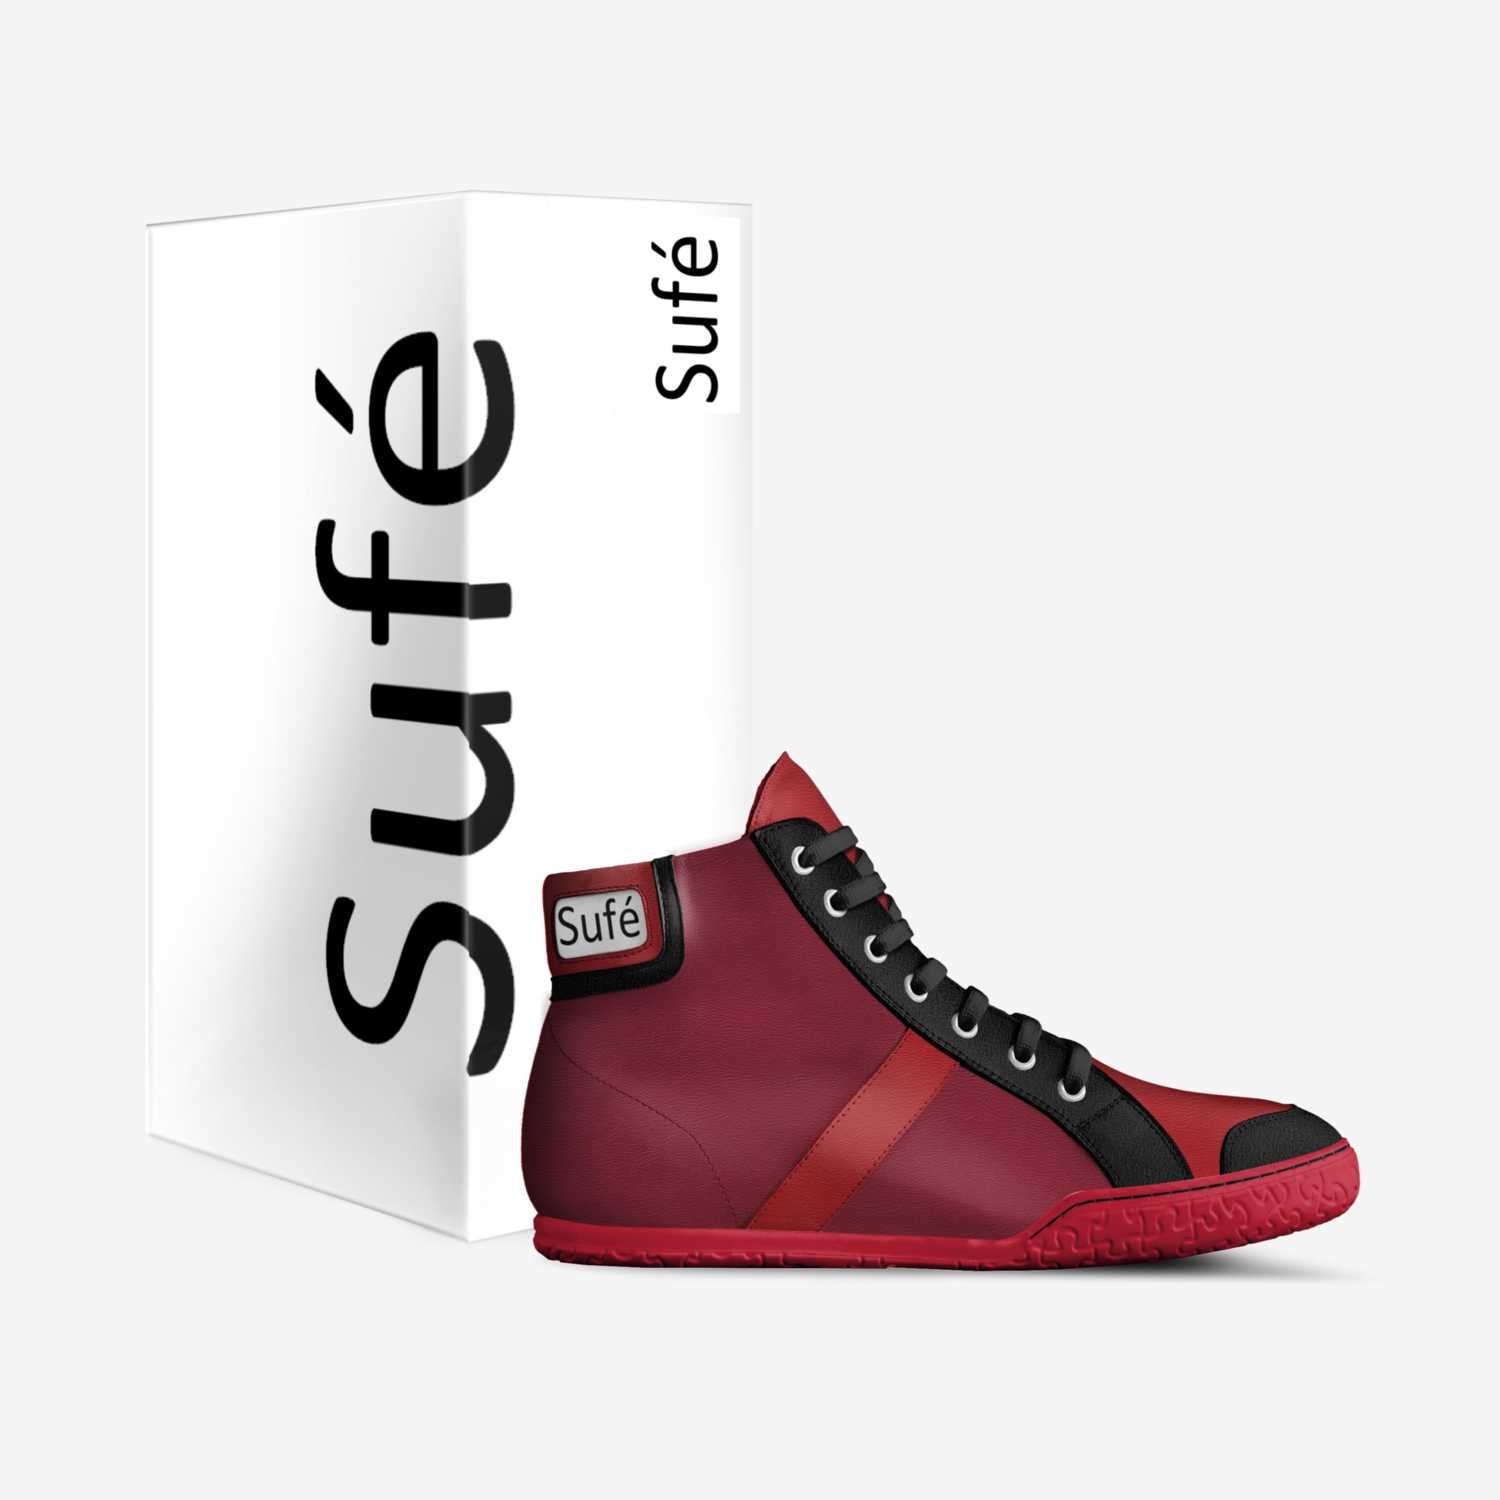 Sufé custom made in Italy shoes by R K Hannan | Box view